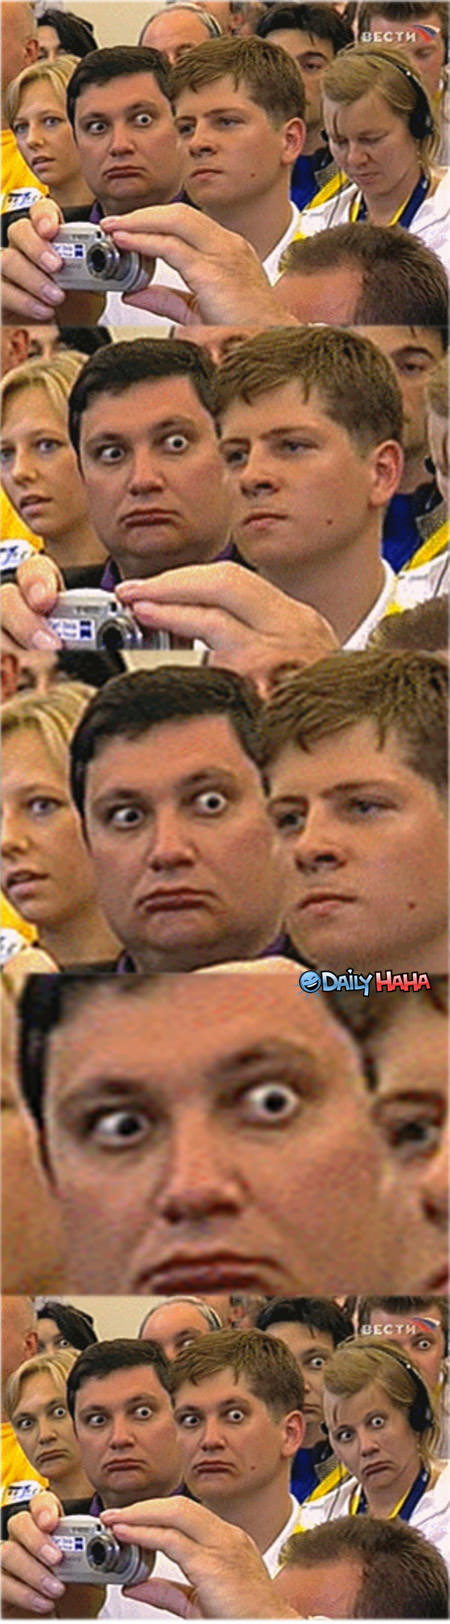 Crazy Eyes Guy funny picture